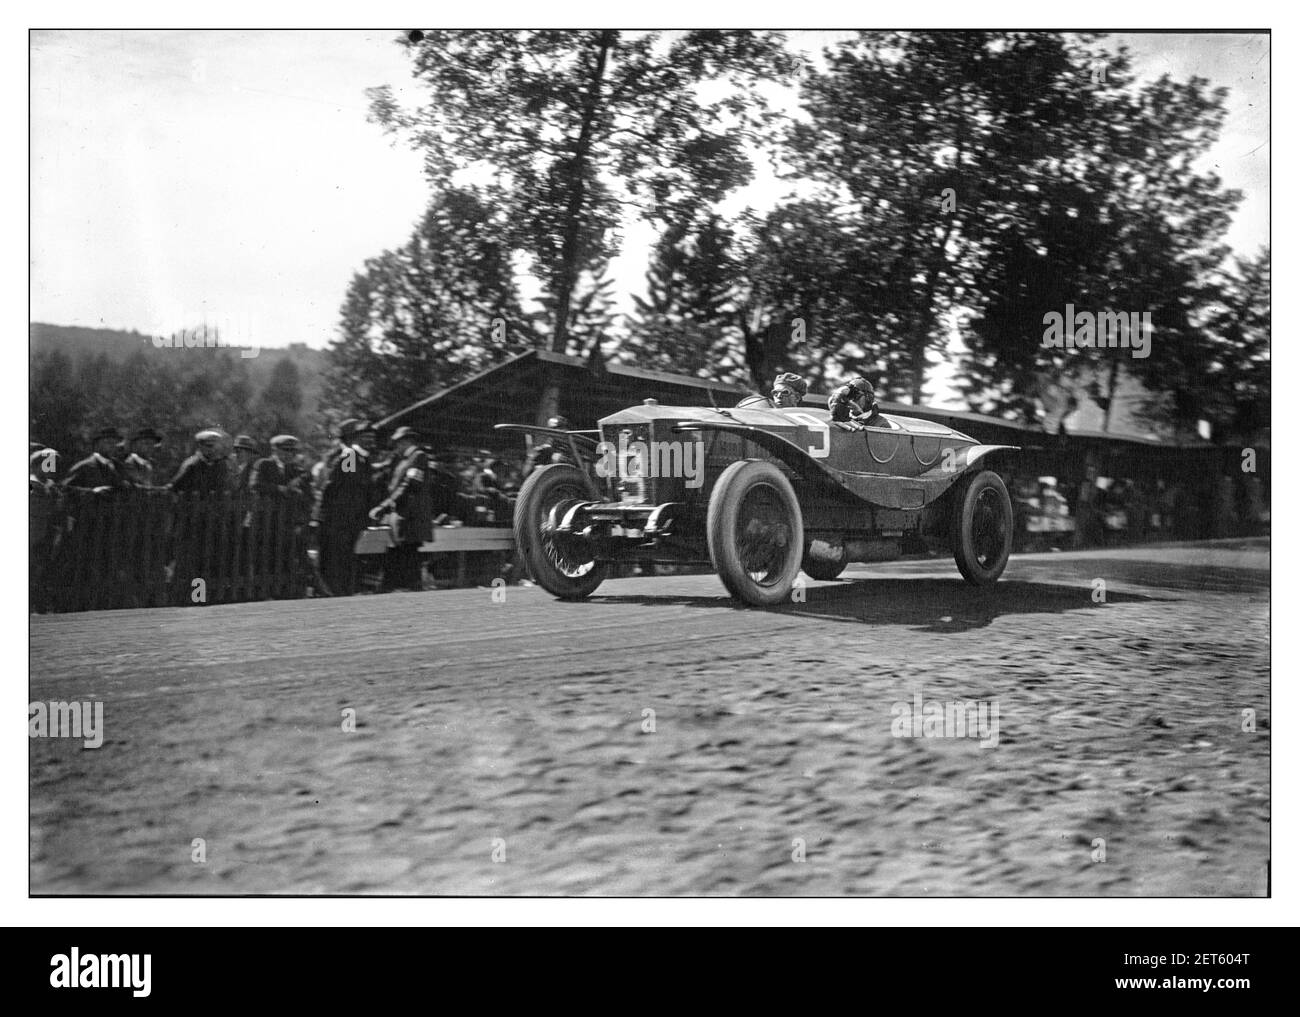 Vintage racing car Bignan at the 1922 Belgian Grand Prix Motor race. The Bignan was a French automobile manufactured between 1918 and 1931 on the north side of central Paris, in Courbevoie. The business was created, and till the mid 1920s-headed up, by Jacques Bignan. Stock Photo